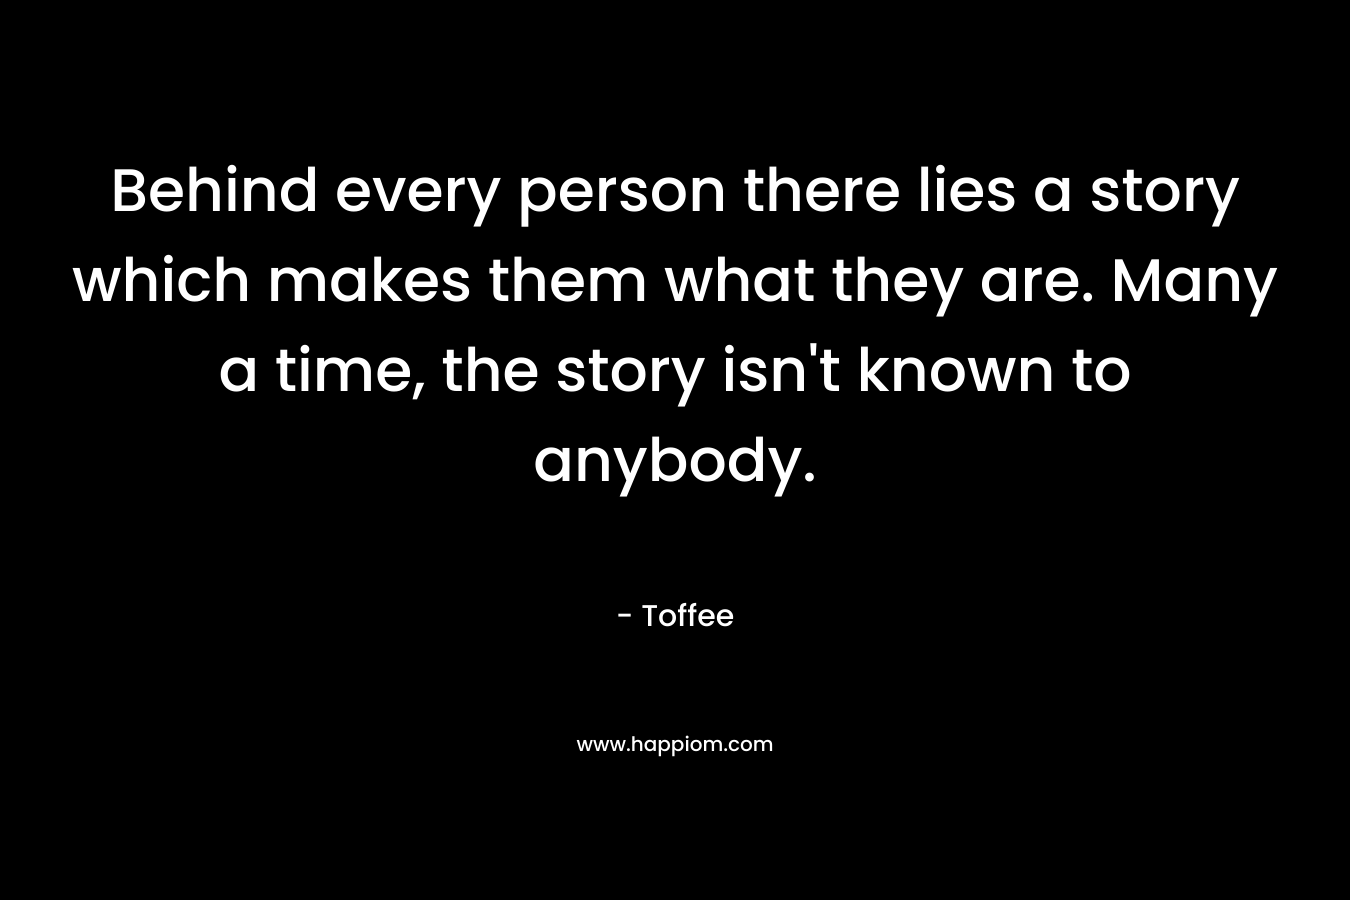 Behind every person there lies a story which makes them what they are. Many a time, the story isn’t known to anybody. – Toffee